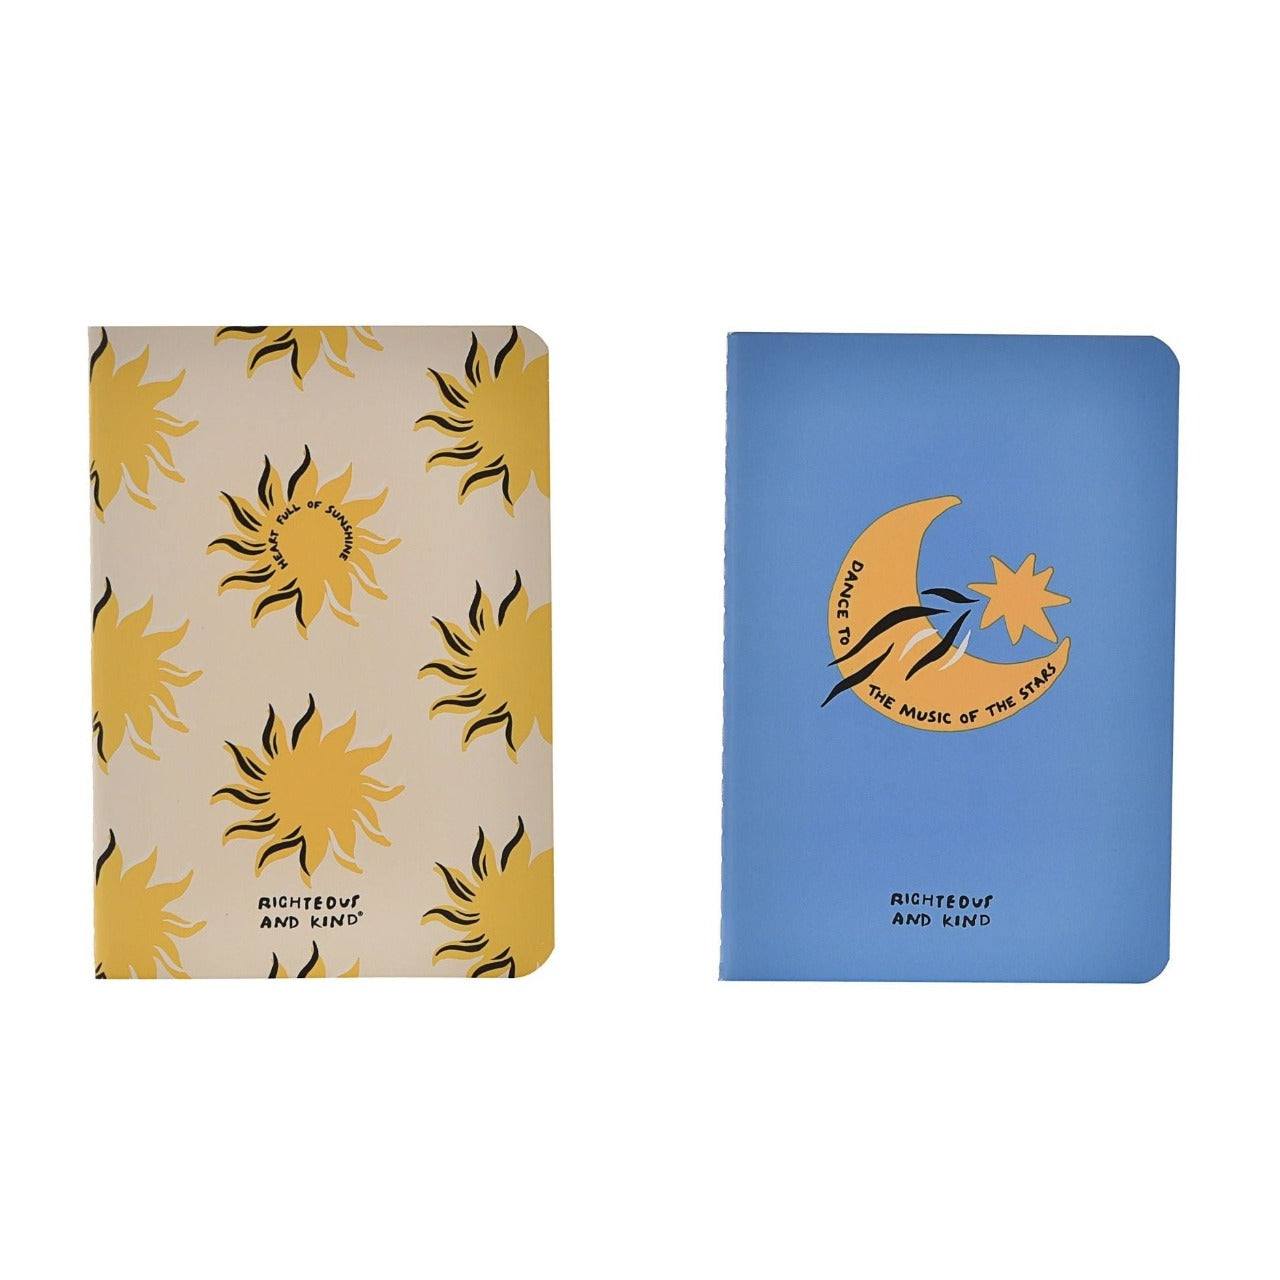 Righteous & Kind Set A6 Notebook  A stylish set of notebooks that would make a beautiful gift for those who love to note down their thoughts or doodle. With gold moon and star designs, this would make a cute addition to any free spirit's stationary collection.